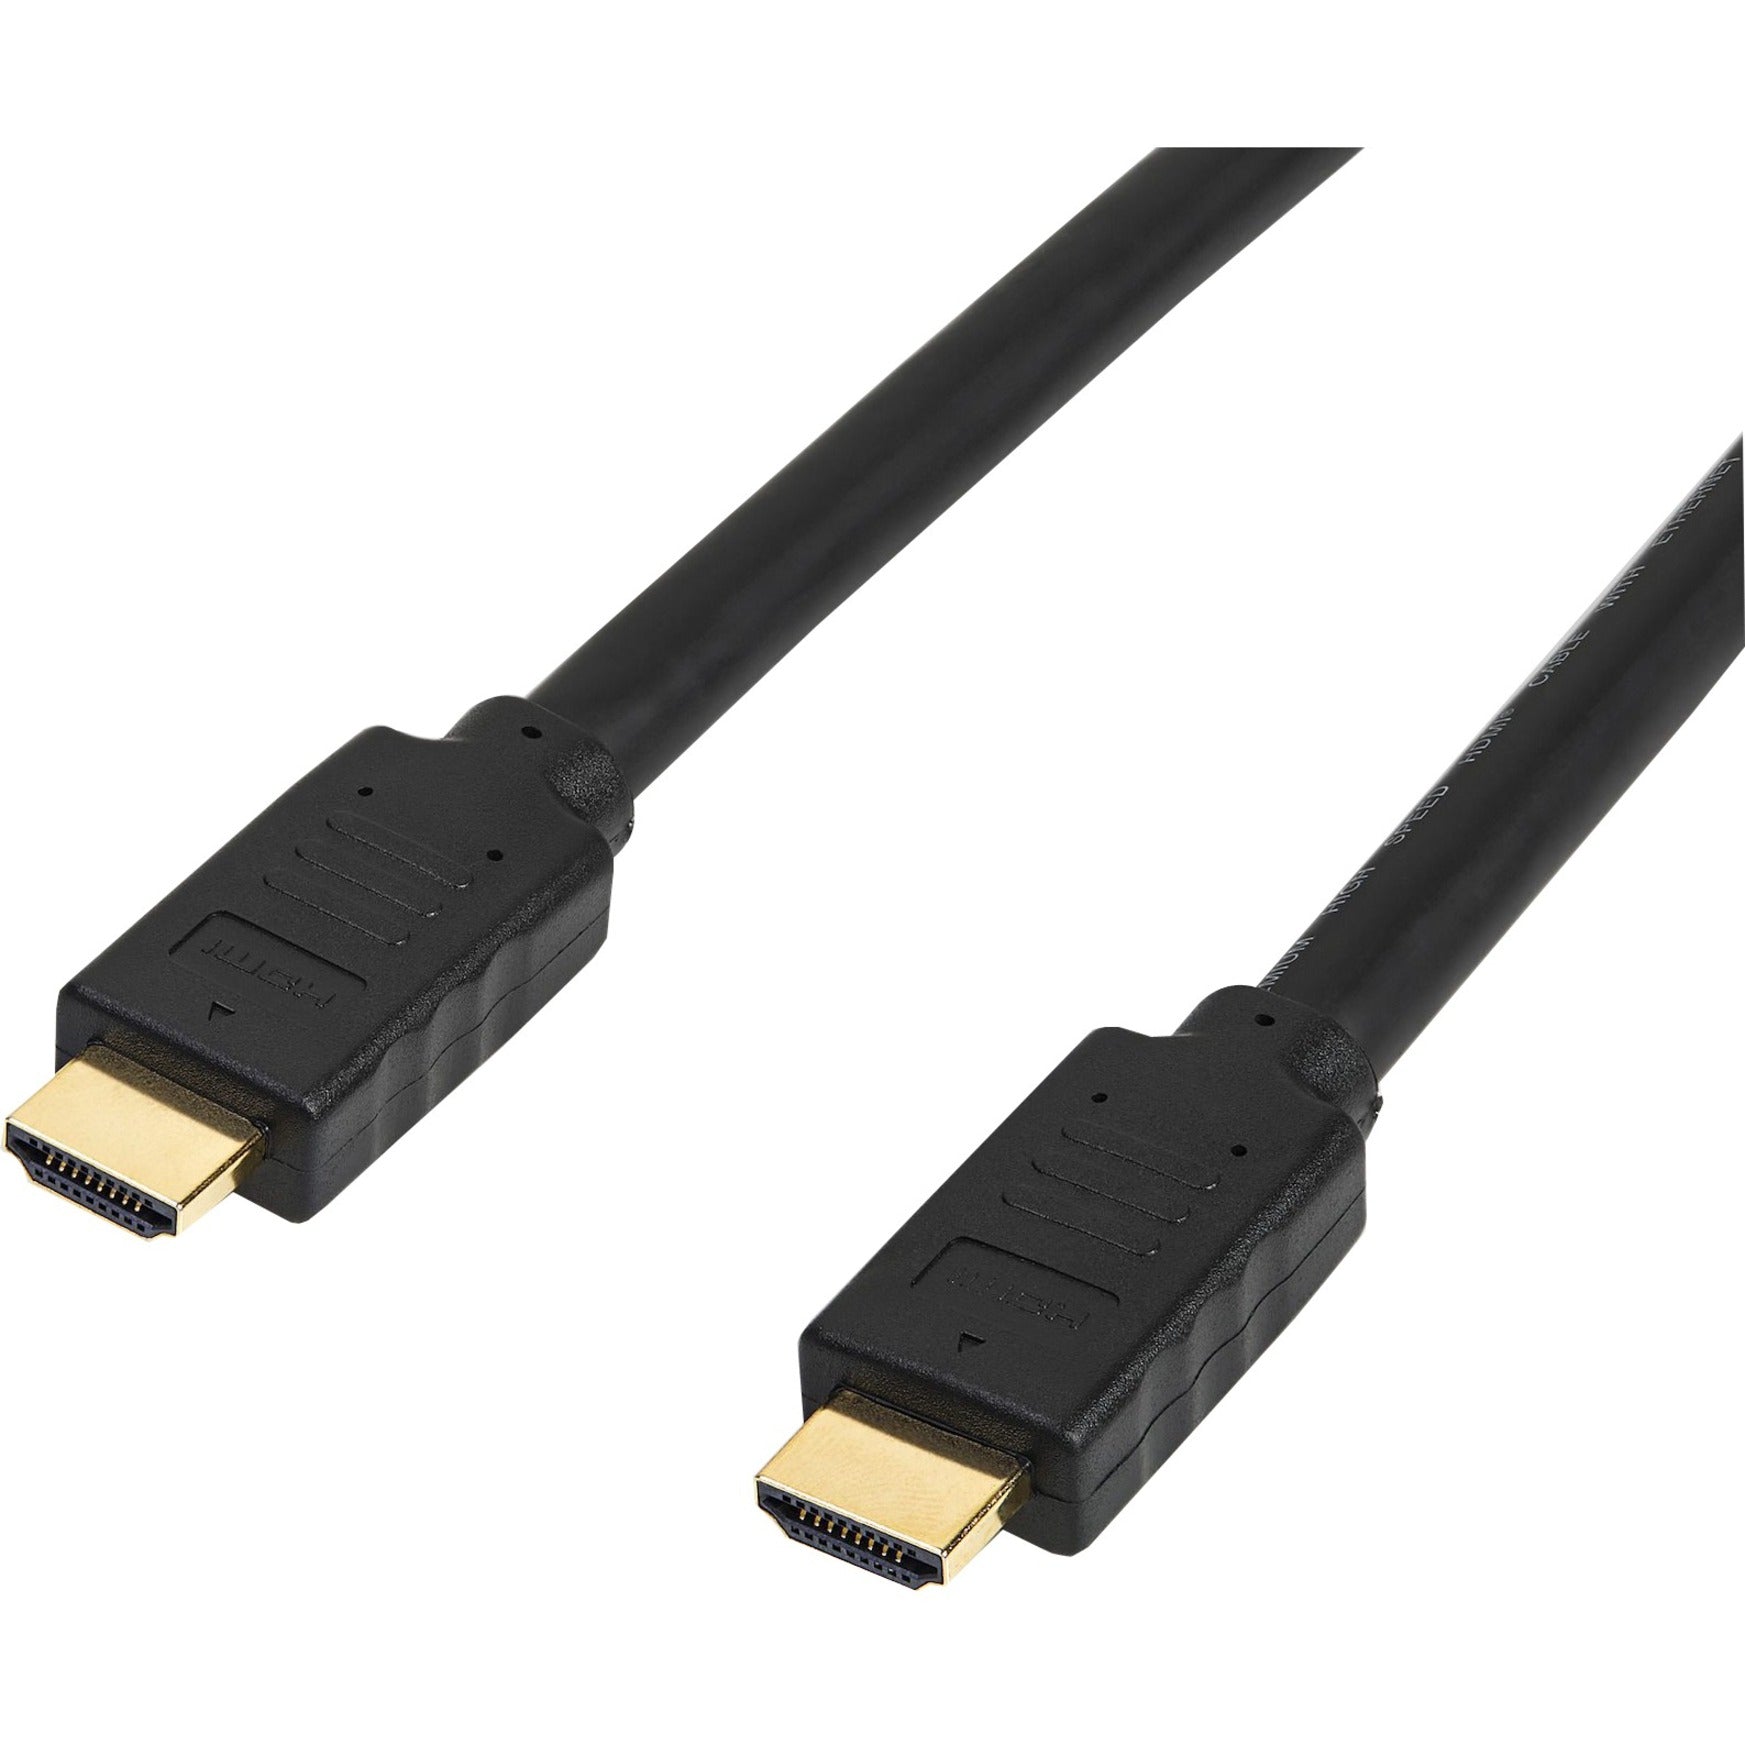 StarTech.com HD2MM15MA HDMI Cable - 15m 4K High Speed Active HDMI Cable with Ethernet, In Wall, 60Hz